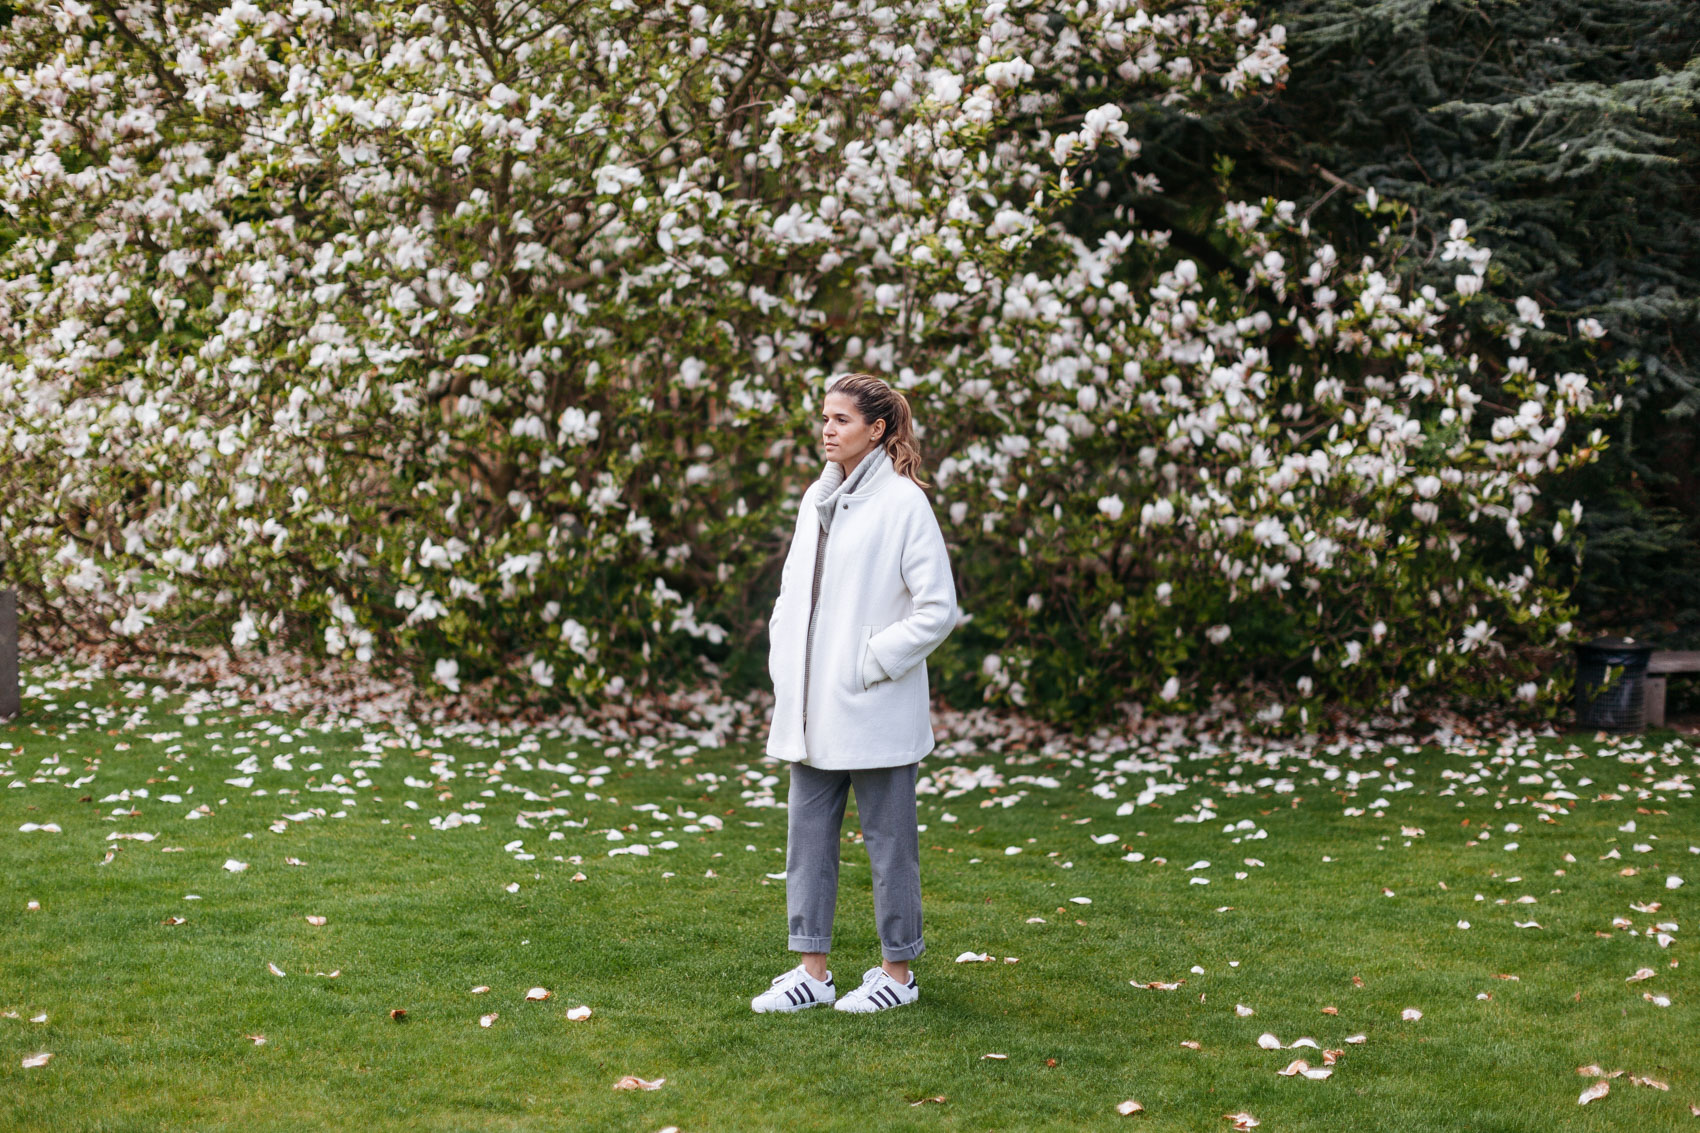 Maristella wearing a grey cashmere turtleneck, white coat, grey trousers and adidas Superstar black and white sneakers